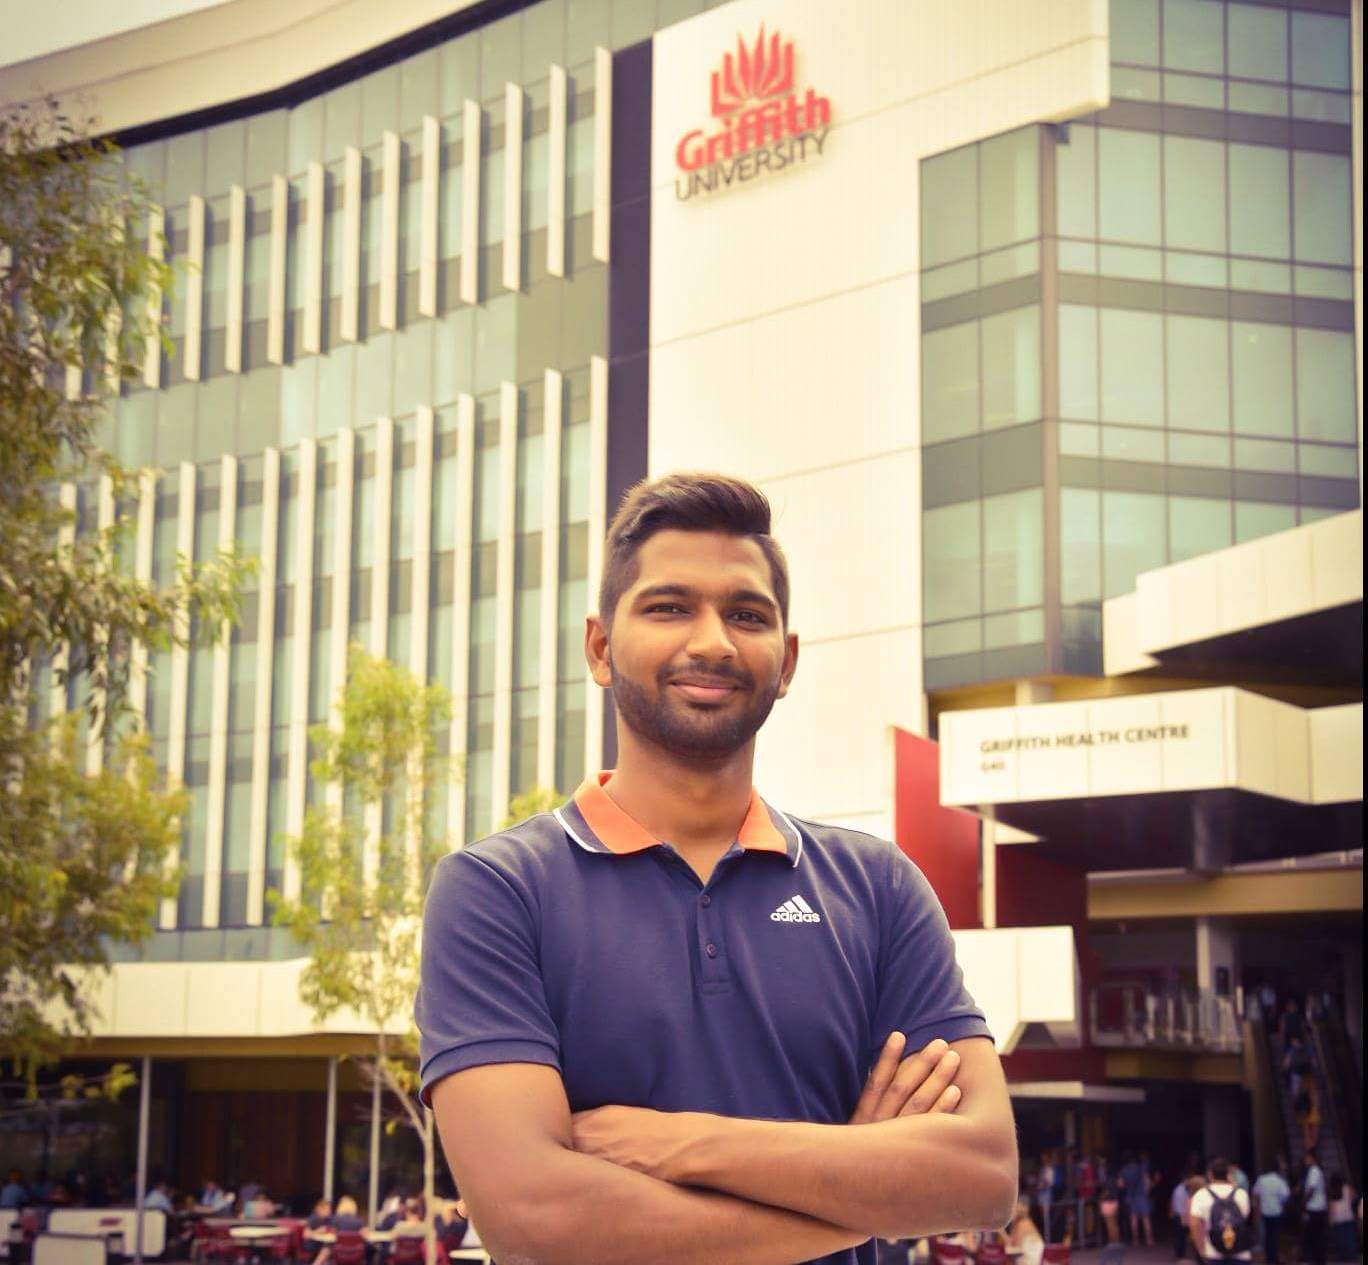 Narasimhan Ravi secured a Griffith University and Gold Coast 2018 Commonwealth Games Scholarship.